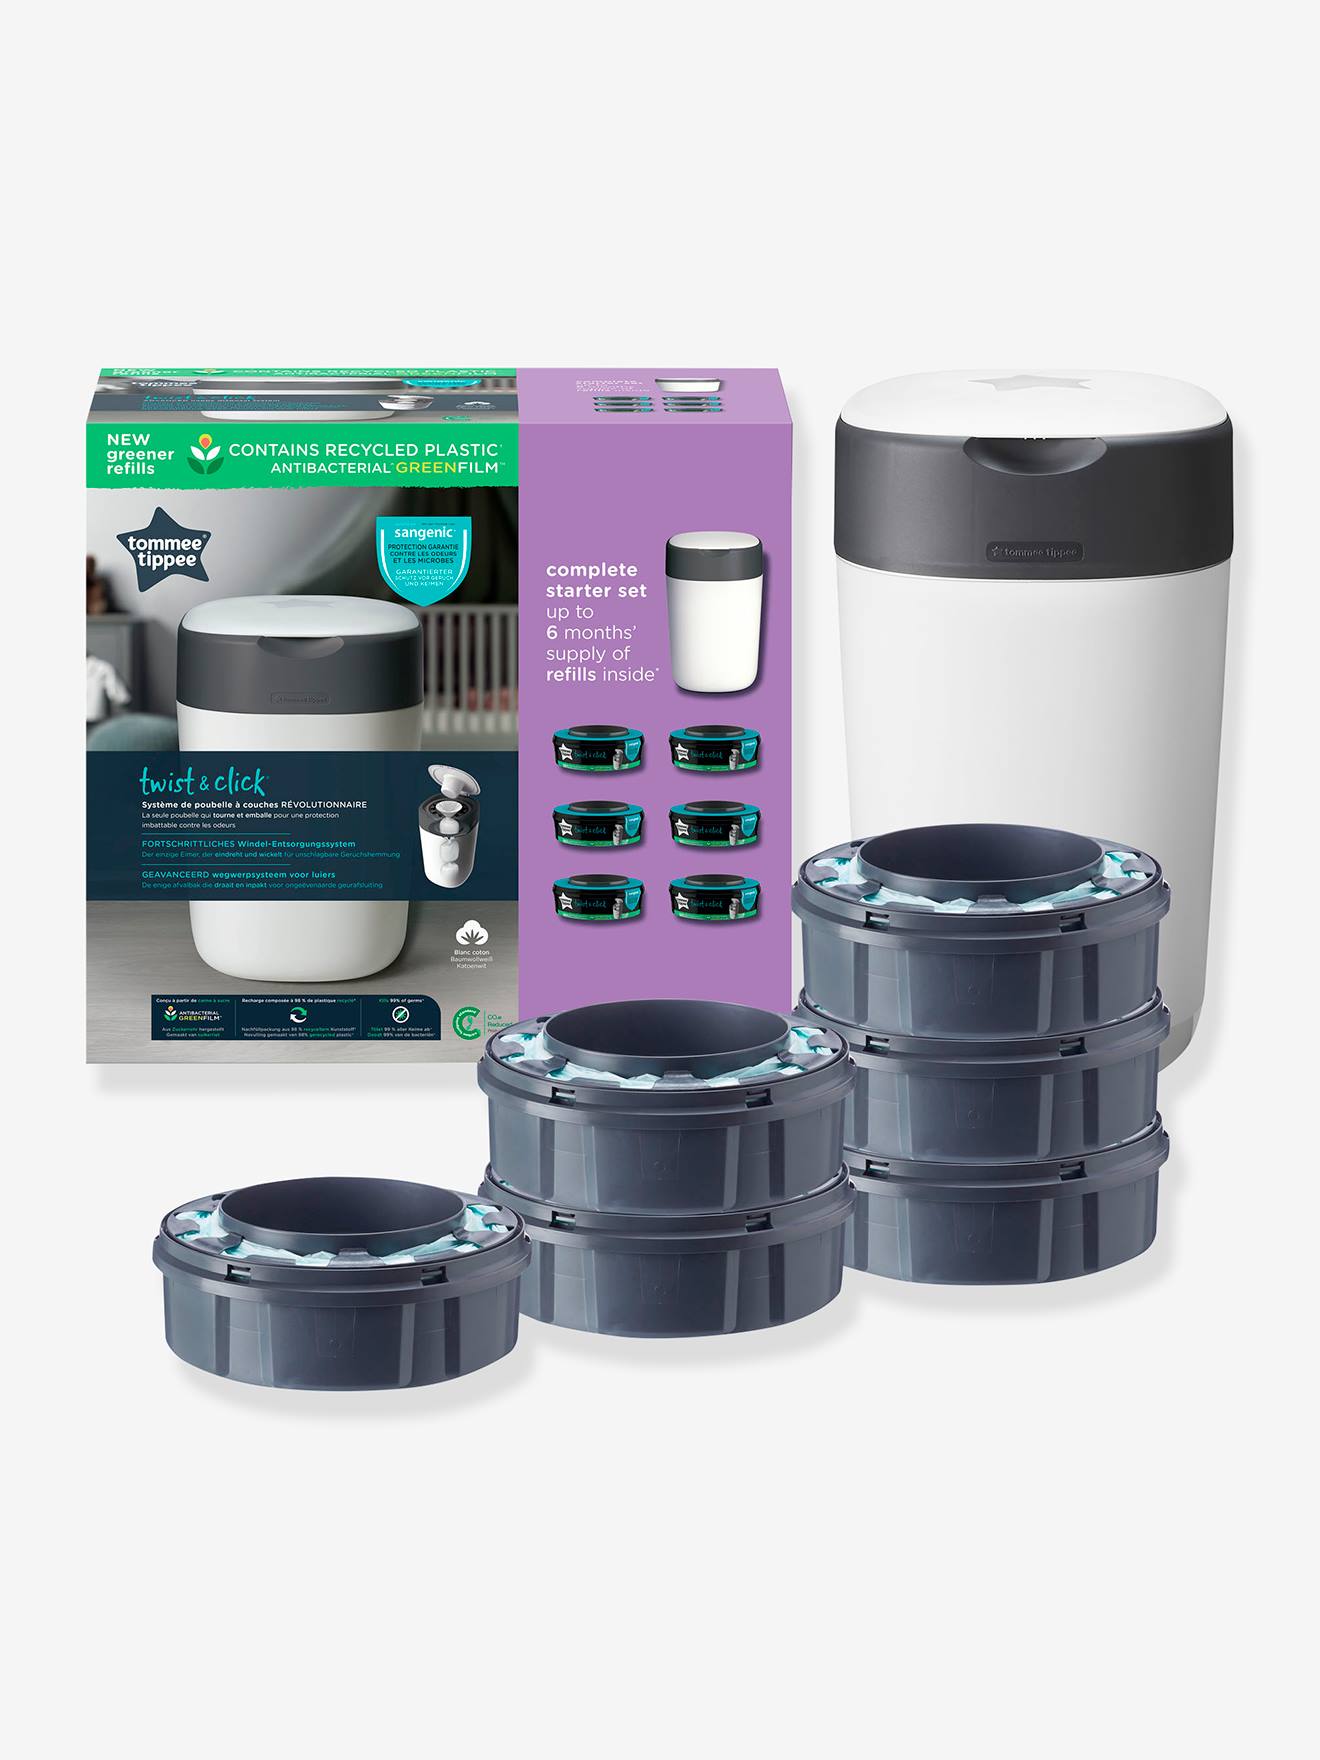 Pack 4 Recambios + Contenedor Sangenic Twist & Click Tommee Tippee